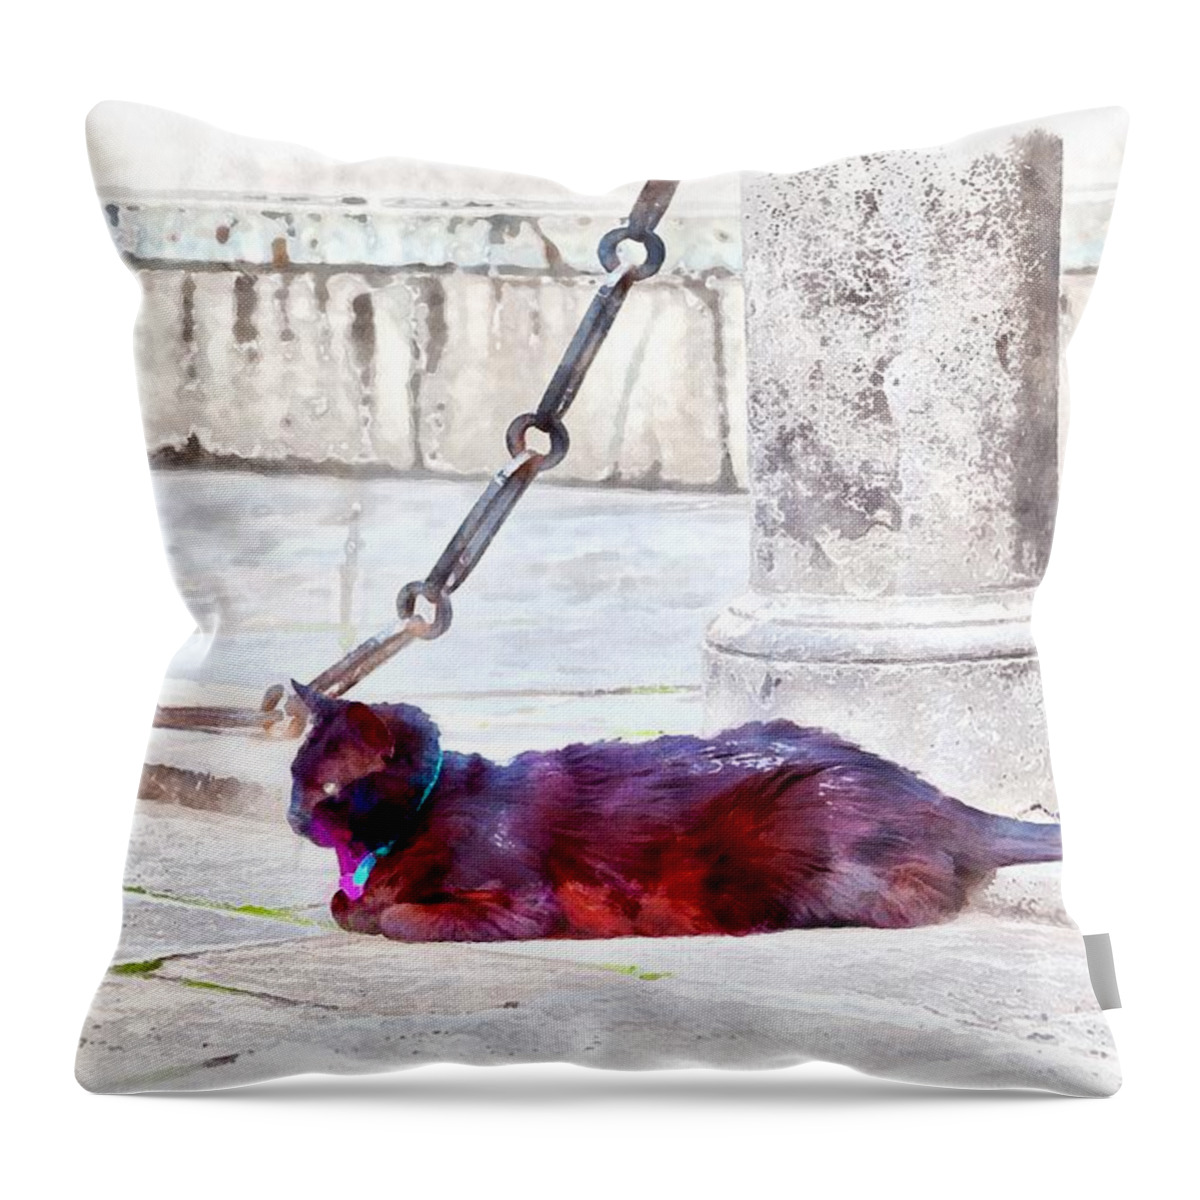 Black; Cat; Street; Road; Alley; Animal; Domestic Animal; Domestic Cat; Collar; Blue; Venice; Italy; Europe; Wonderful; Beautiful; Wild; Attentively; Nature; Naturally; Grey; Stone; Chain; Wall; Sidewalk; Eyes; Background Throw Pillow featuring the digital art A black cat with a blue-and-pink collar by Gina Koch